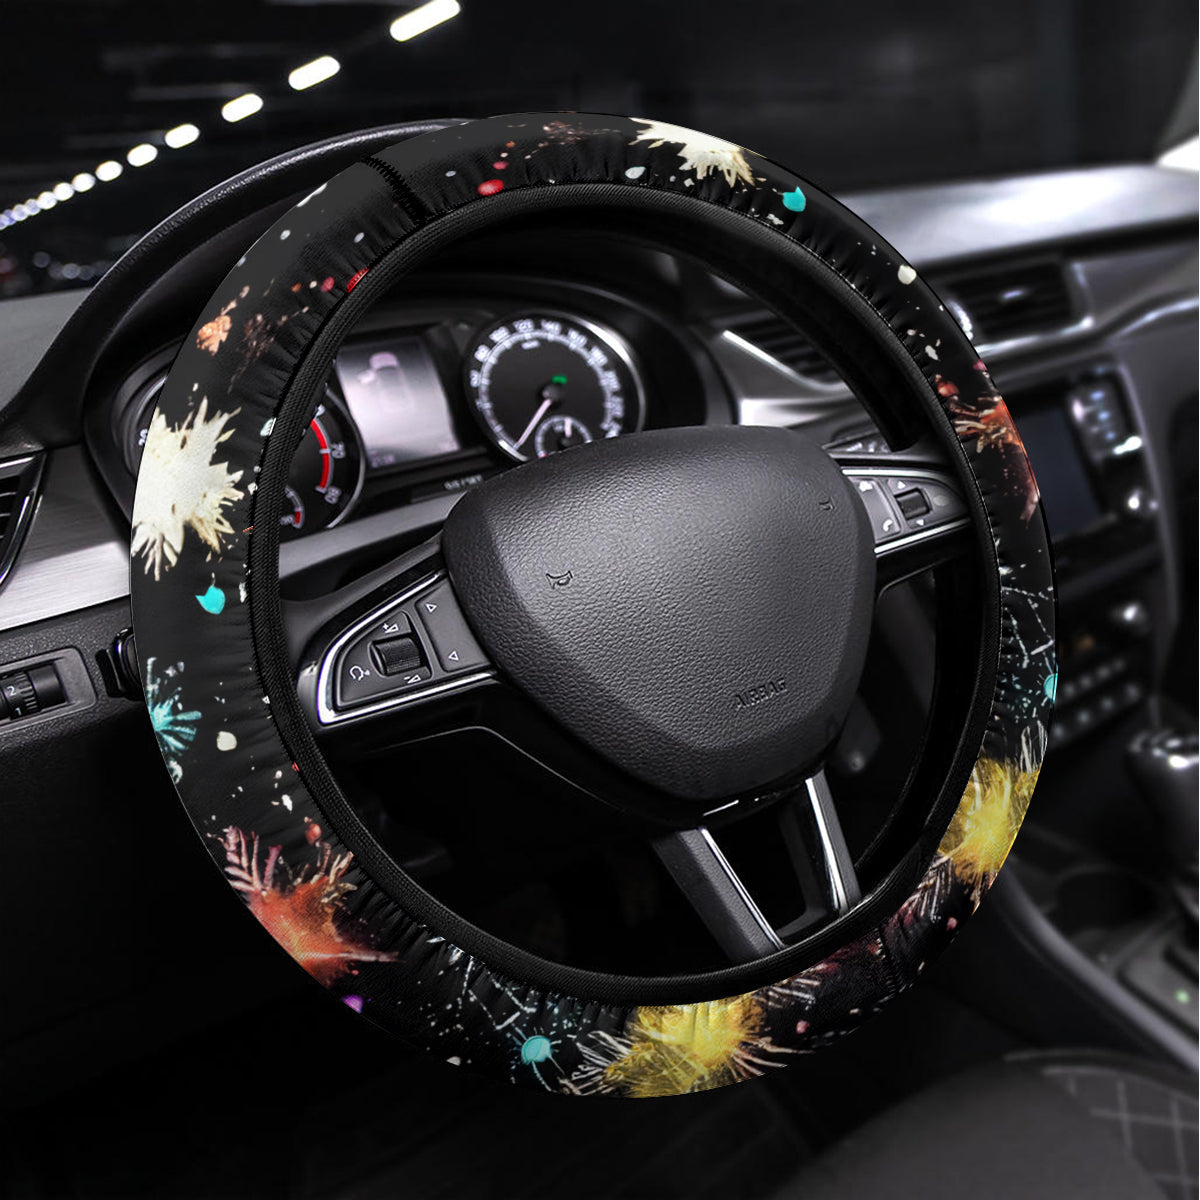 Skeleton Santa Claus Steering Wheel Cover Whe You're Dead Inside But It's Christmas